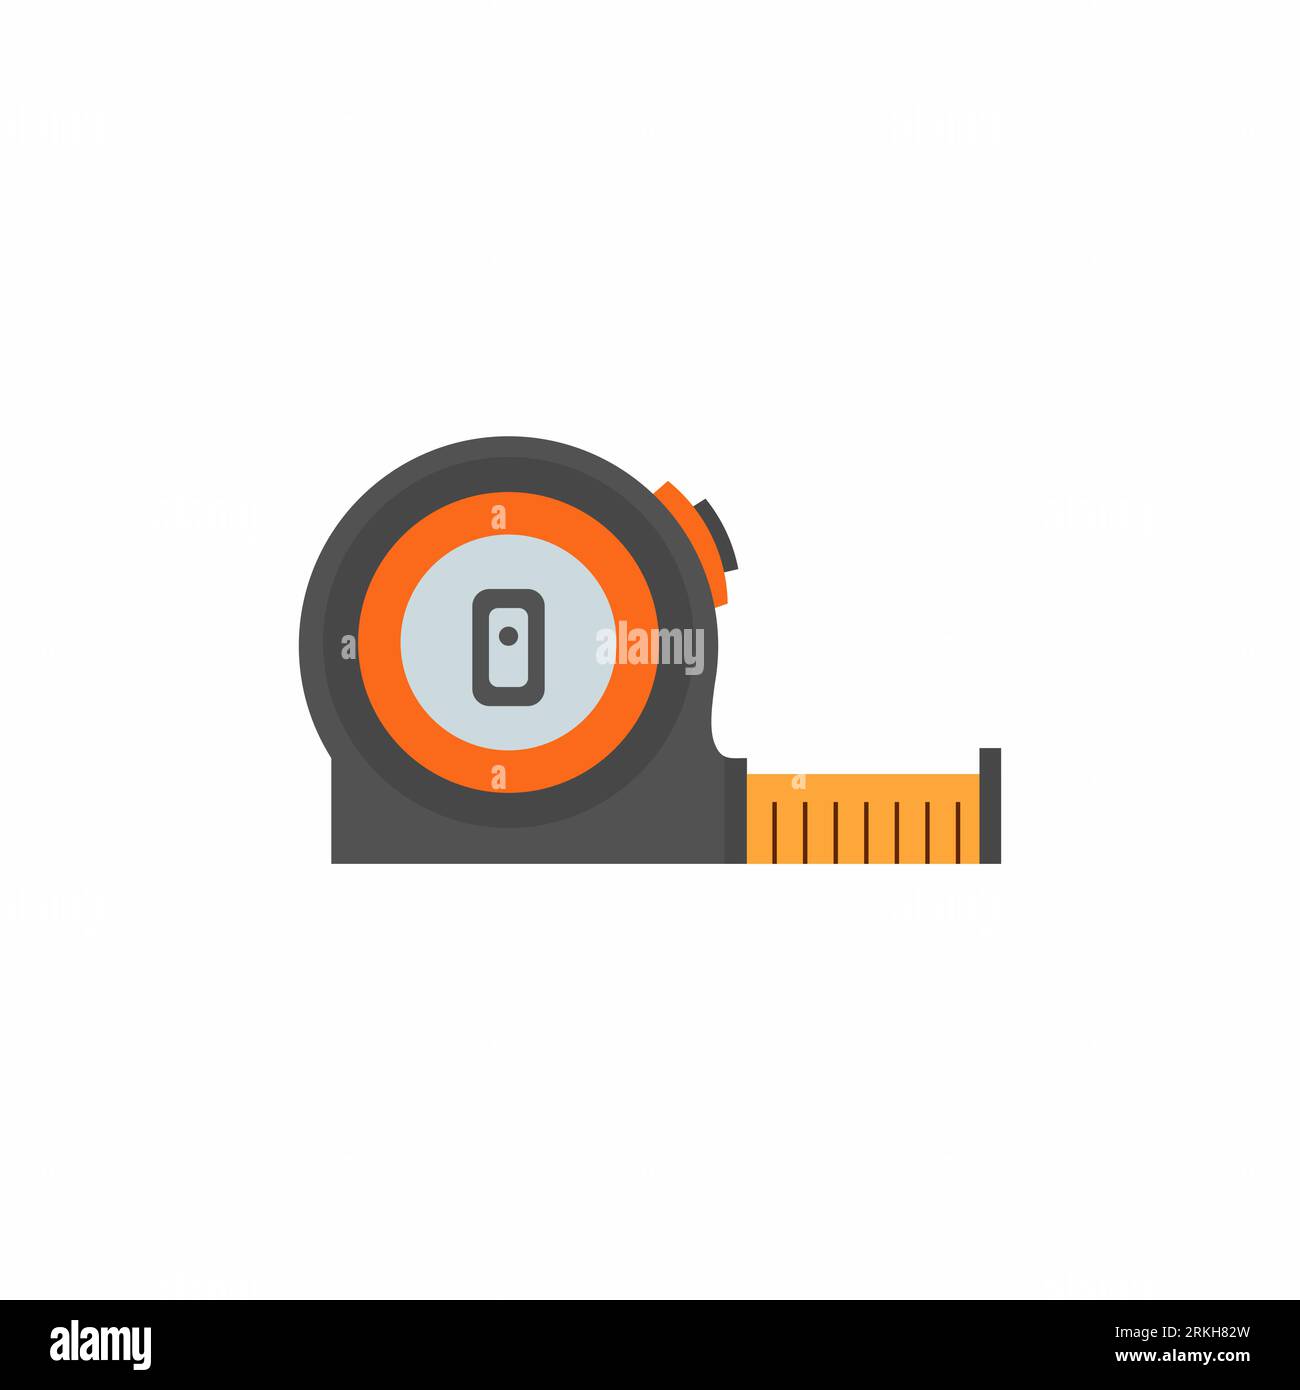 https://c8.alamy.com/comp/2RKH82W/roll-meter-in-flat-trendy-hand-meter-tool-construction-meter-tape-measure-icon-isolated-on-white-background-stationary-for-carpenter-in-cartoon-st-2RKH82W.jpg